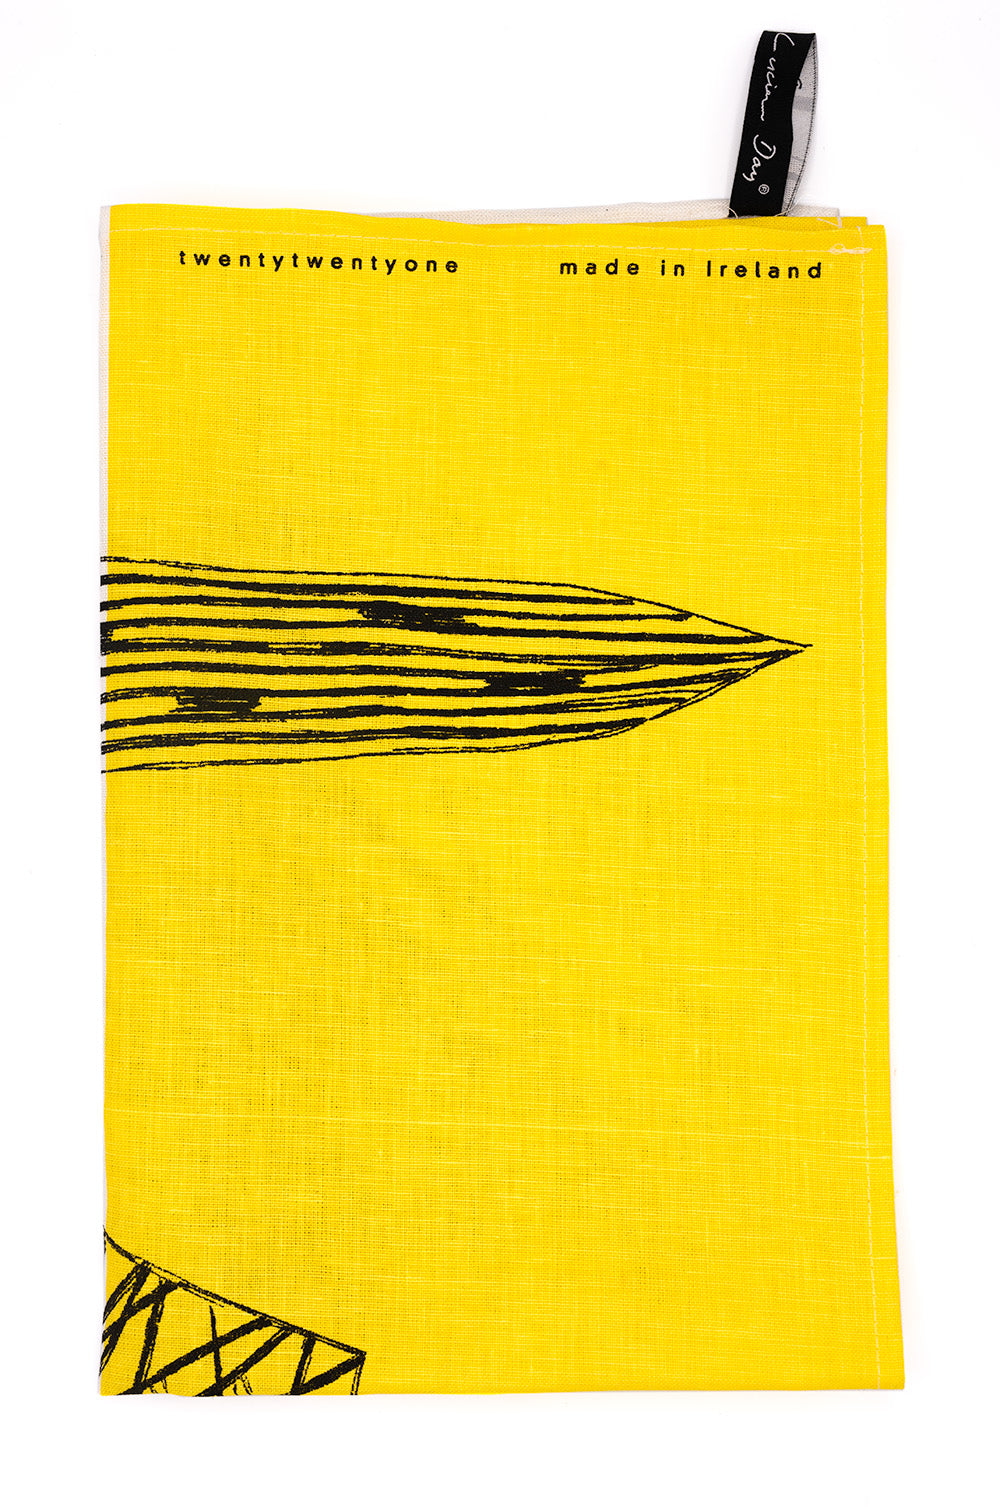 Image of tea towel folded in to 1/4. Yellow design with black leaf detail. Text reading 'twentytwentyone, made in ireland'